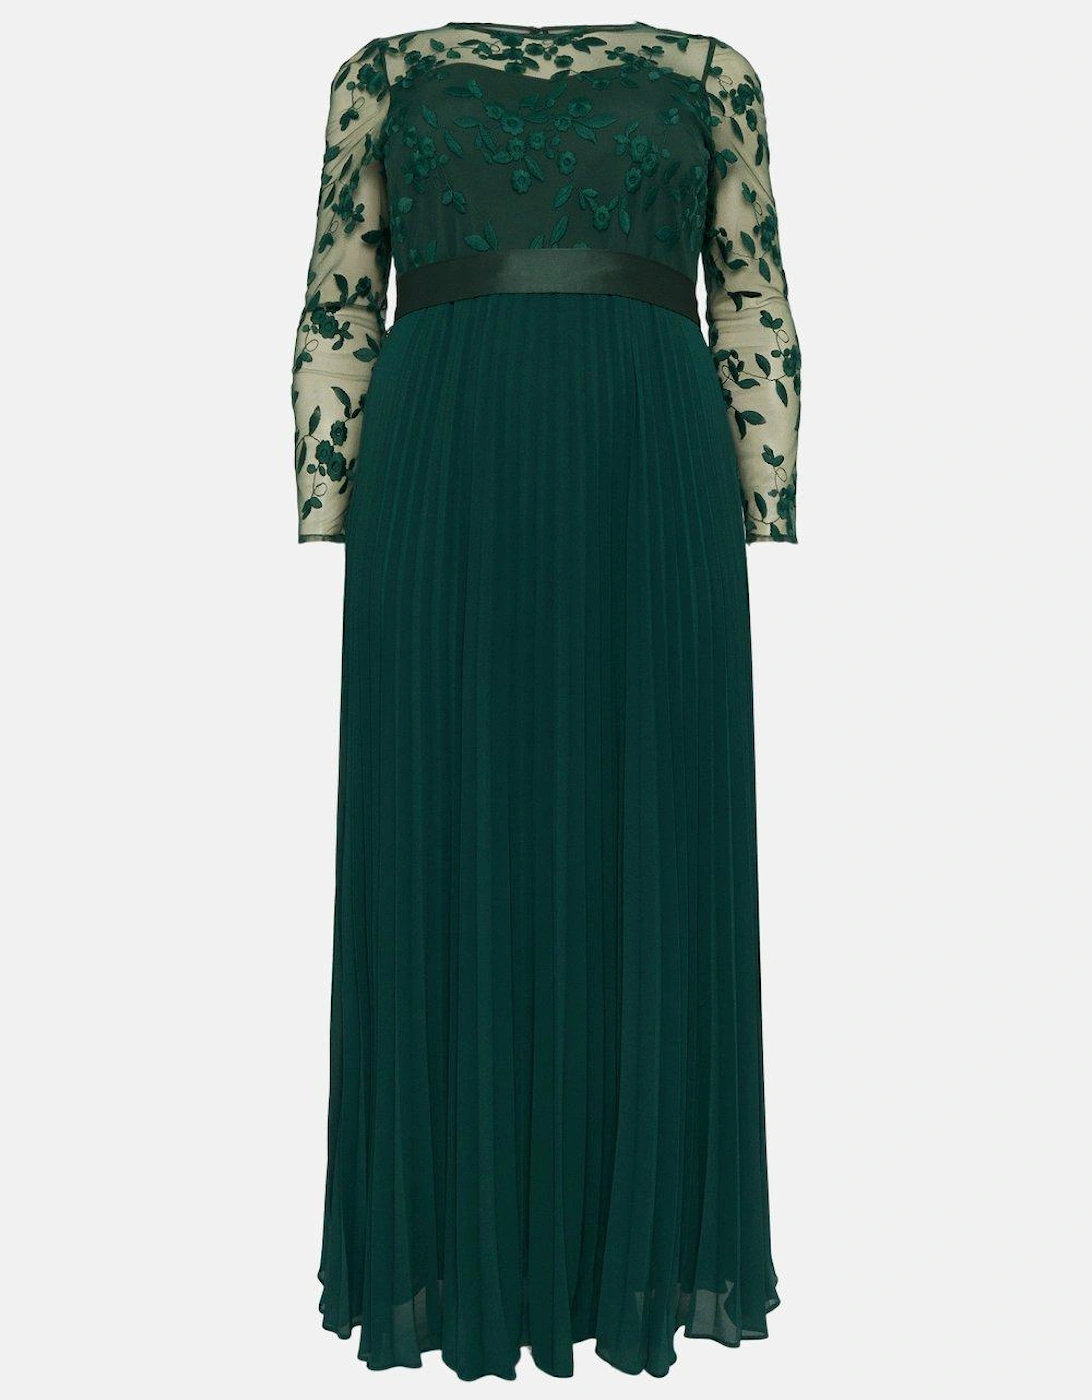 Plus Size Embroidered Long Sleeve Maxi Dress